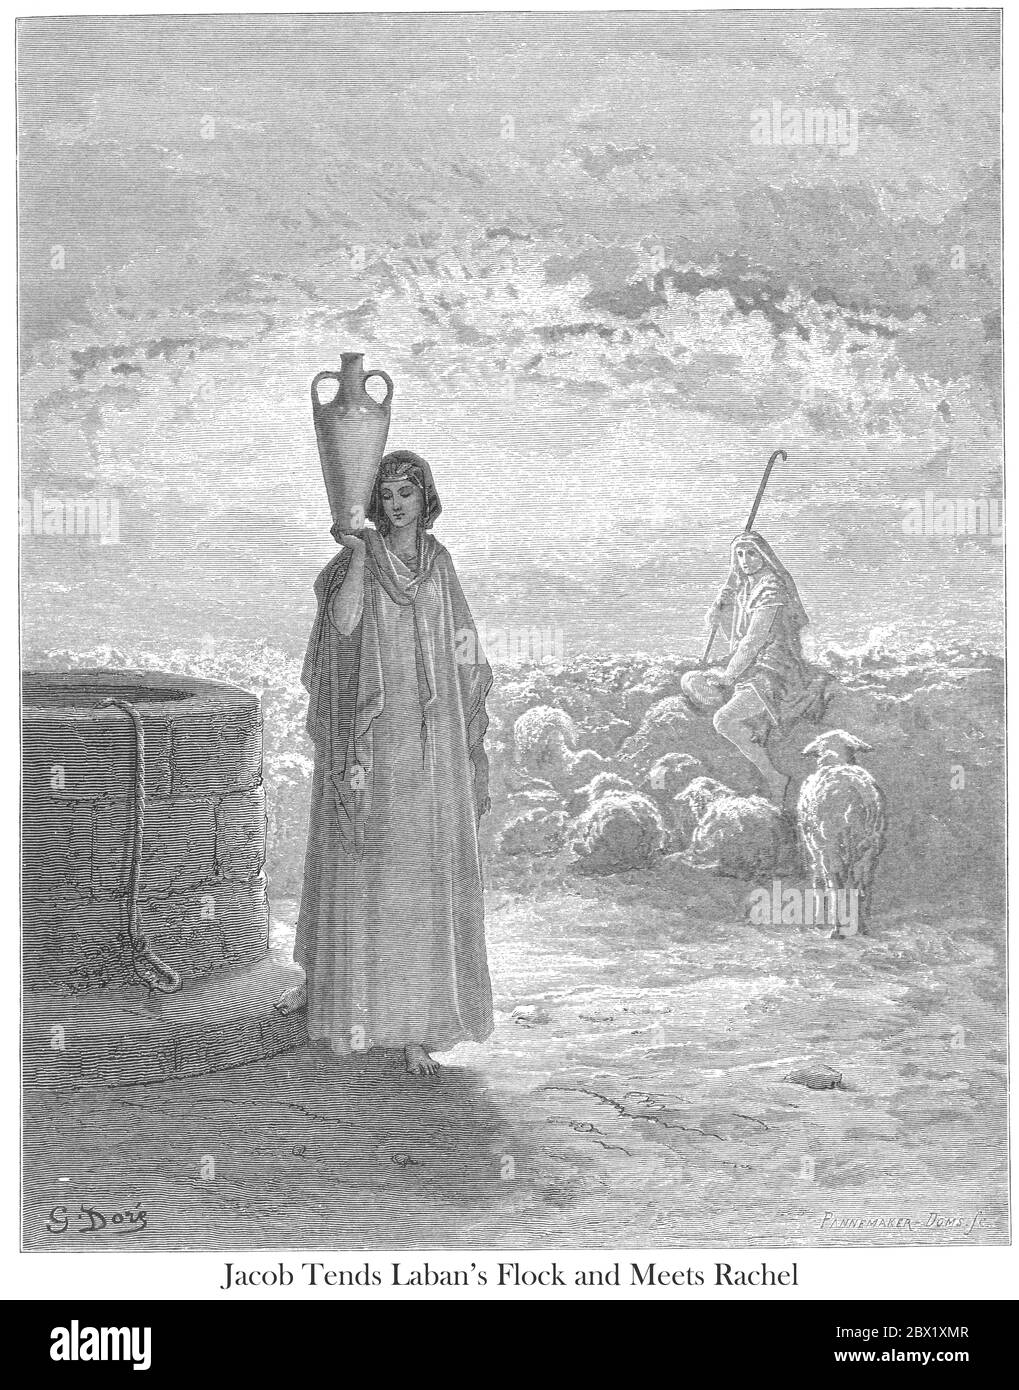 Jacob Tends Laban's Flocks and Meets Rachel Genesis 29:1-20 From the book 'Bible Gallery' Illustrated by Gustave Dore with Memoir of Doré and Descriptive Letter-press by Talbot W. Chambers D.D. Published by Cassell & Company Limited in London and simultaneously by Mame in Tours, France in 1866 Stock Photo